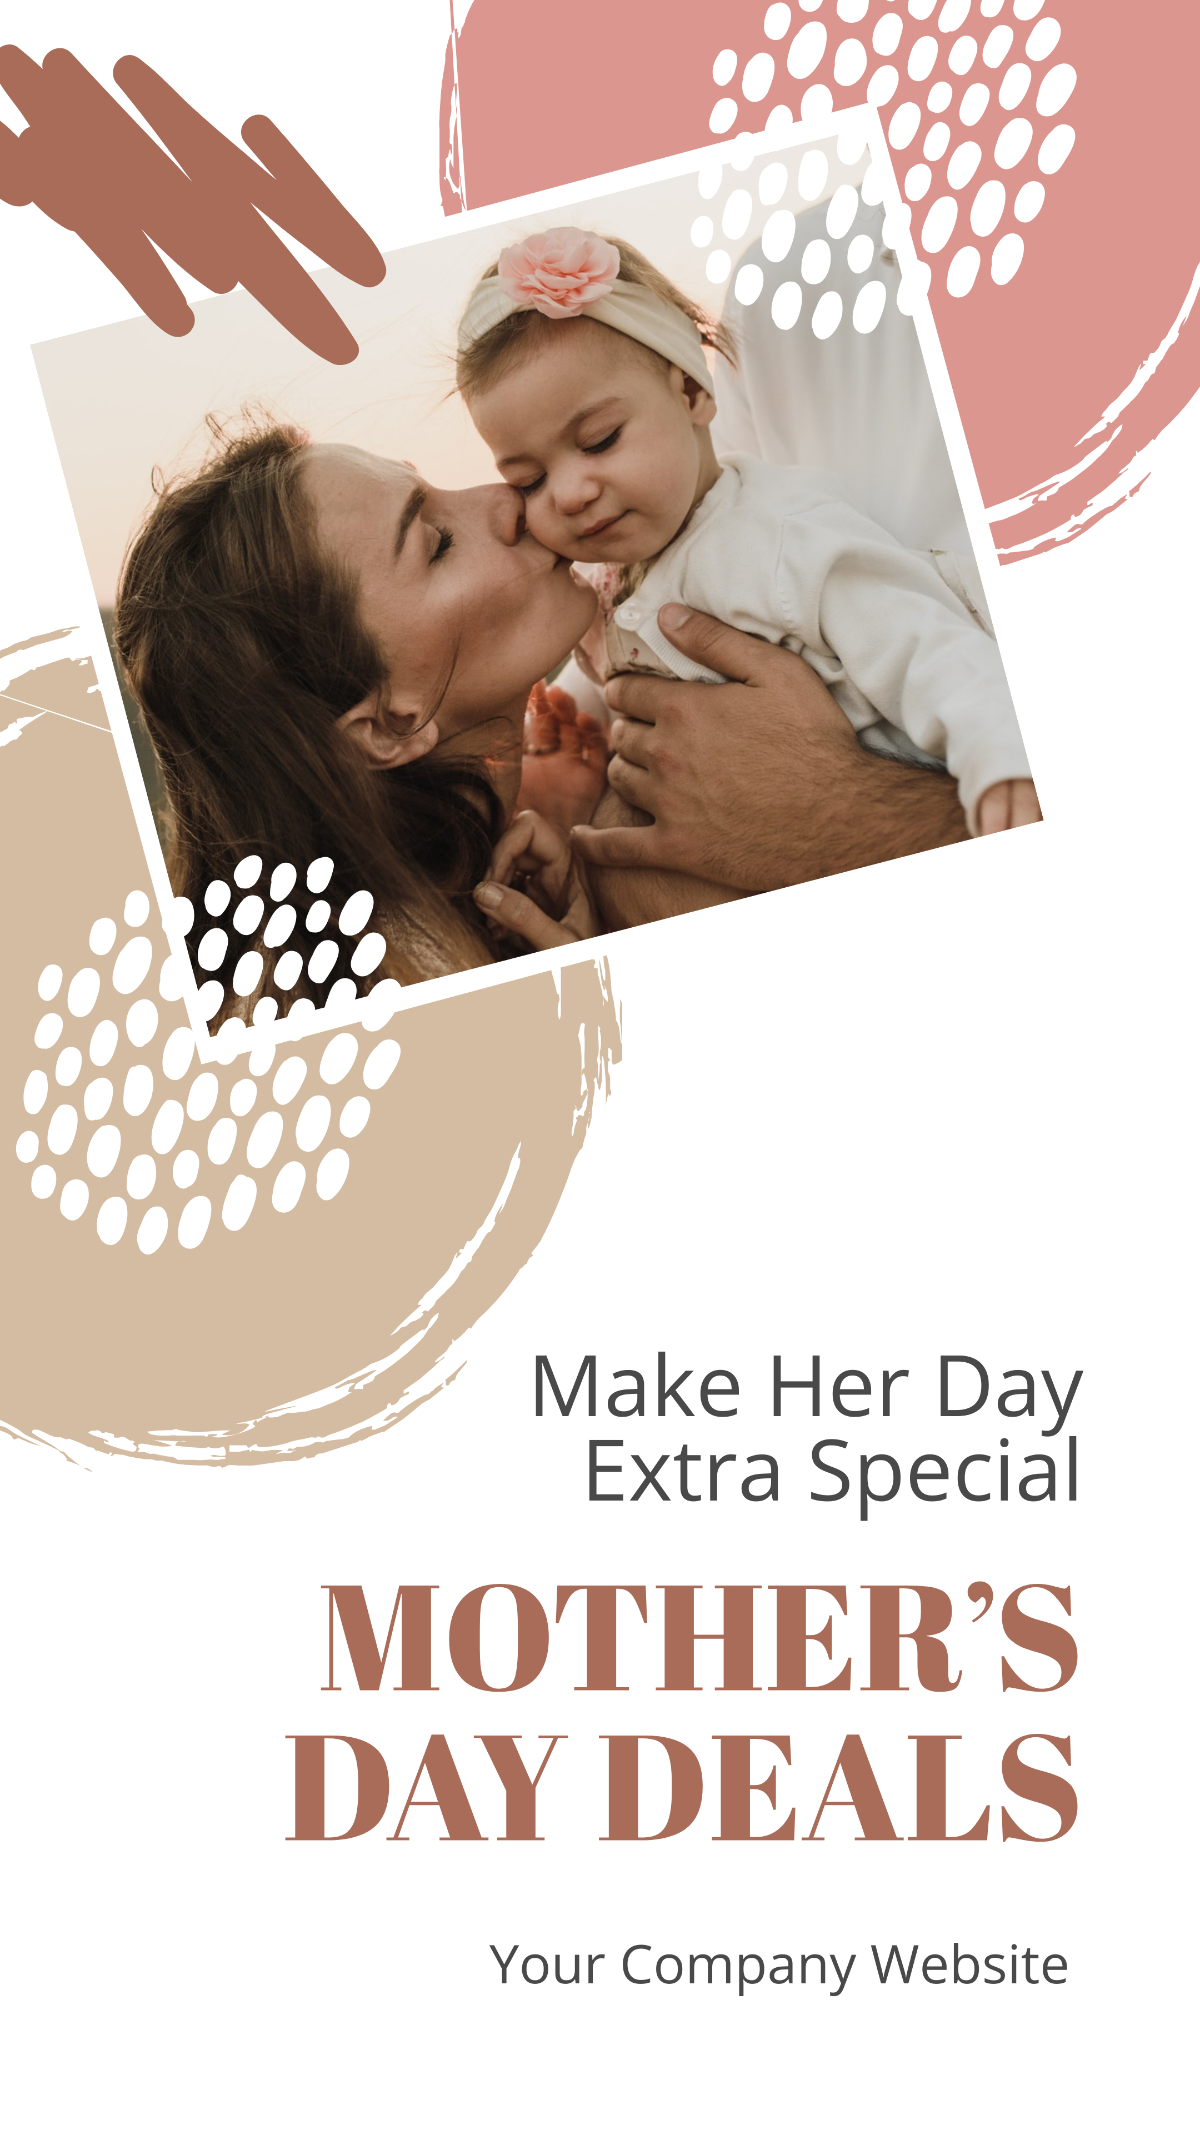 Free Mother's Day Deals Instagram Story Template